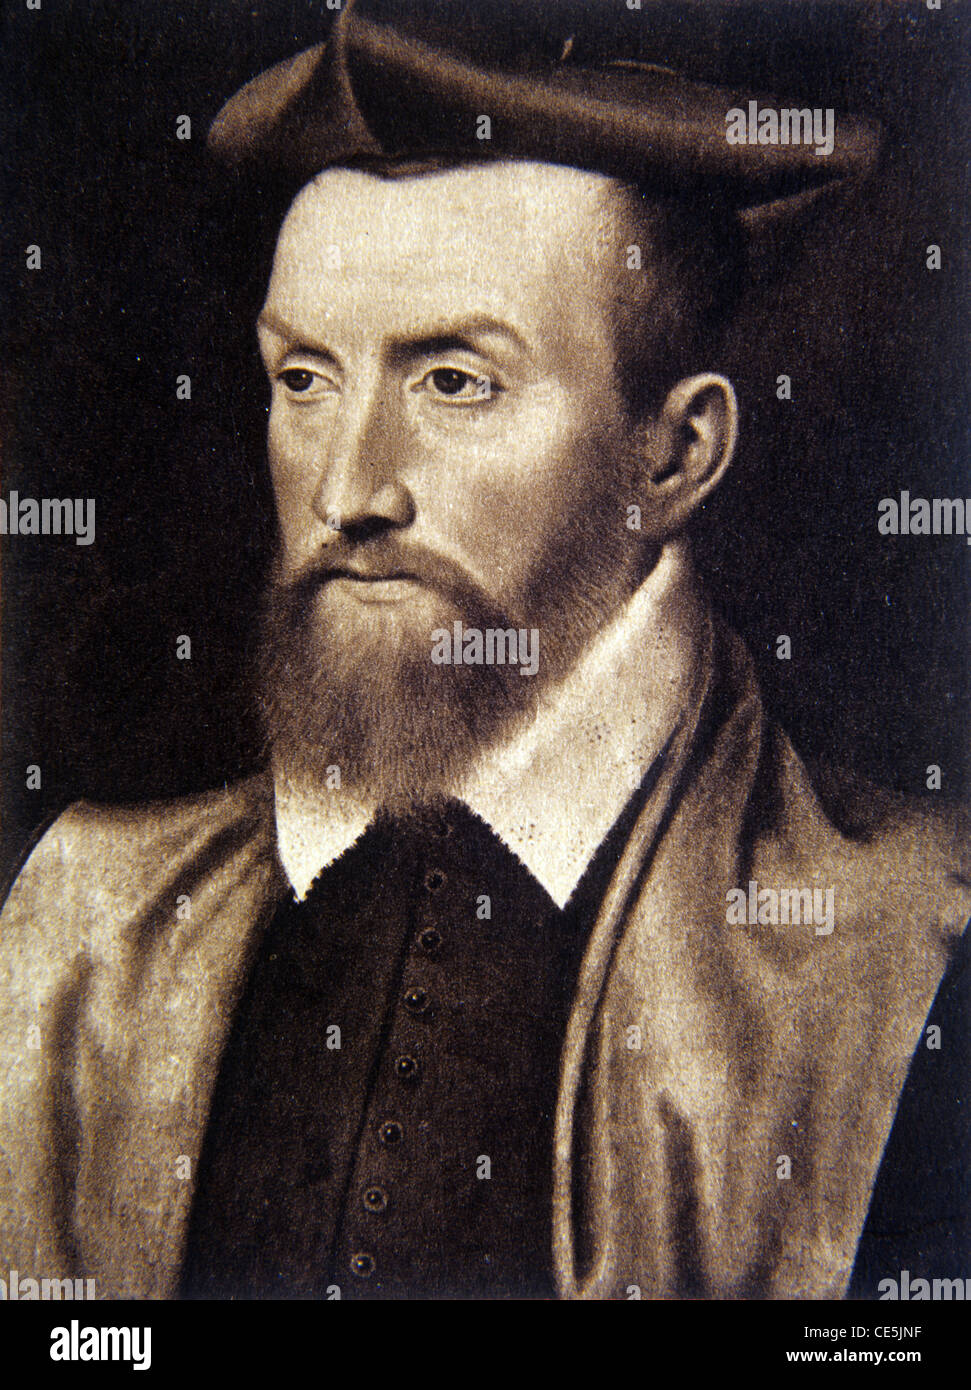 Gaspard de Coligny (1519-1572) French Admiral, Nobleman and Protestant Huguenot Leader. Portrait. Stock Photo